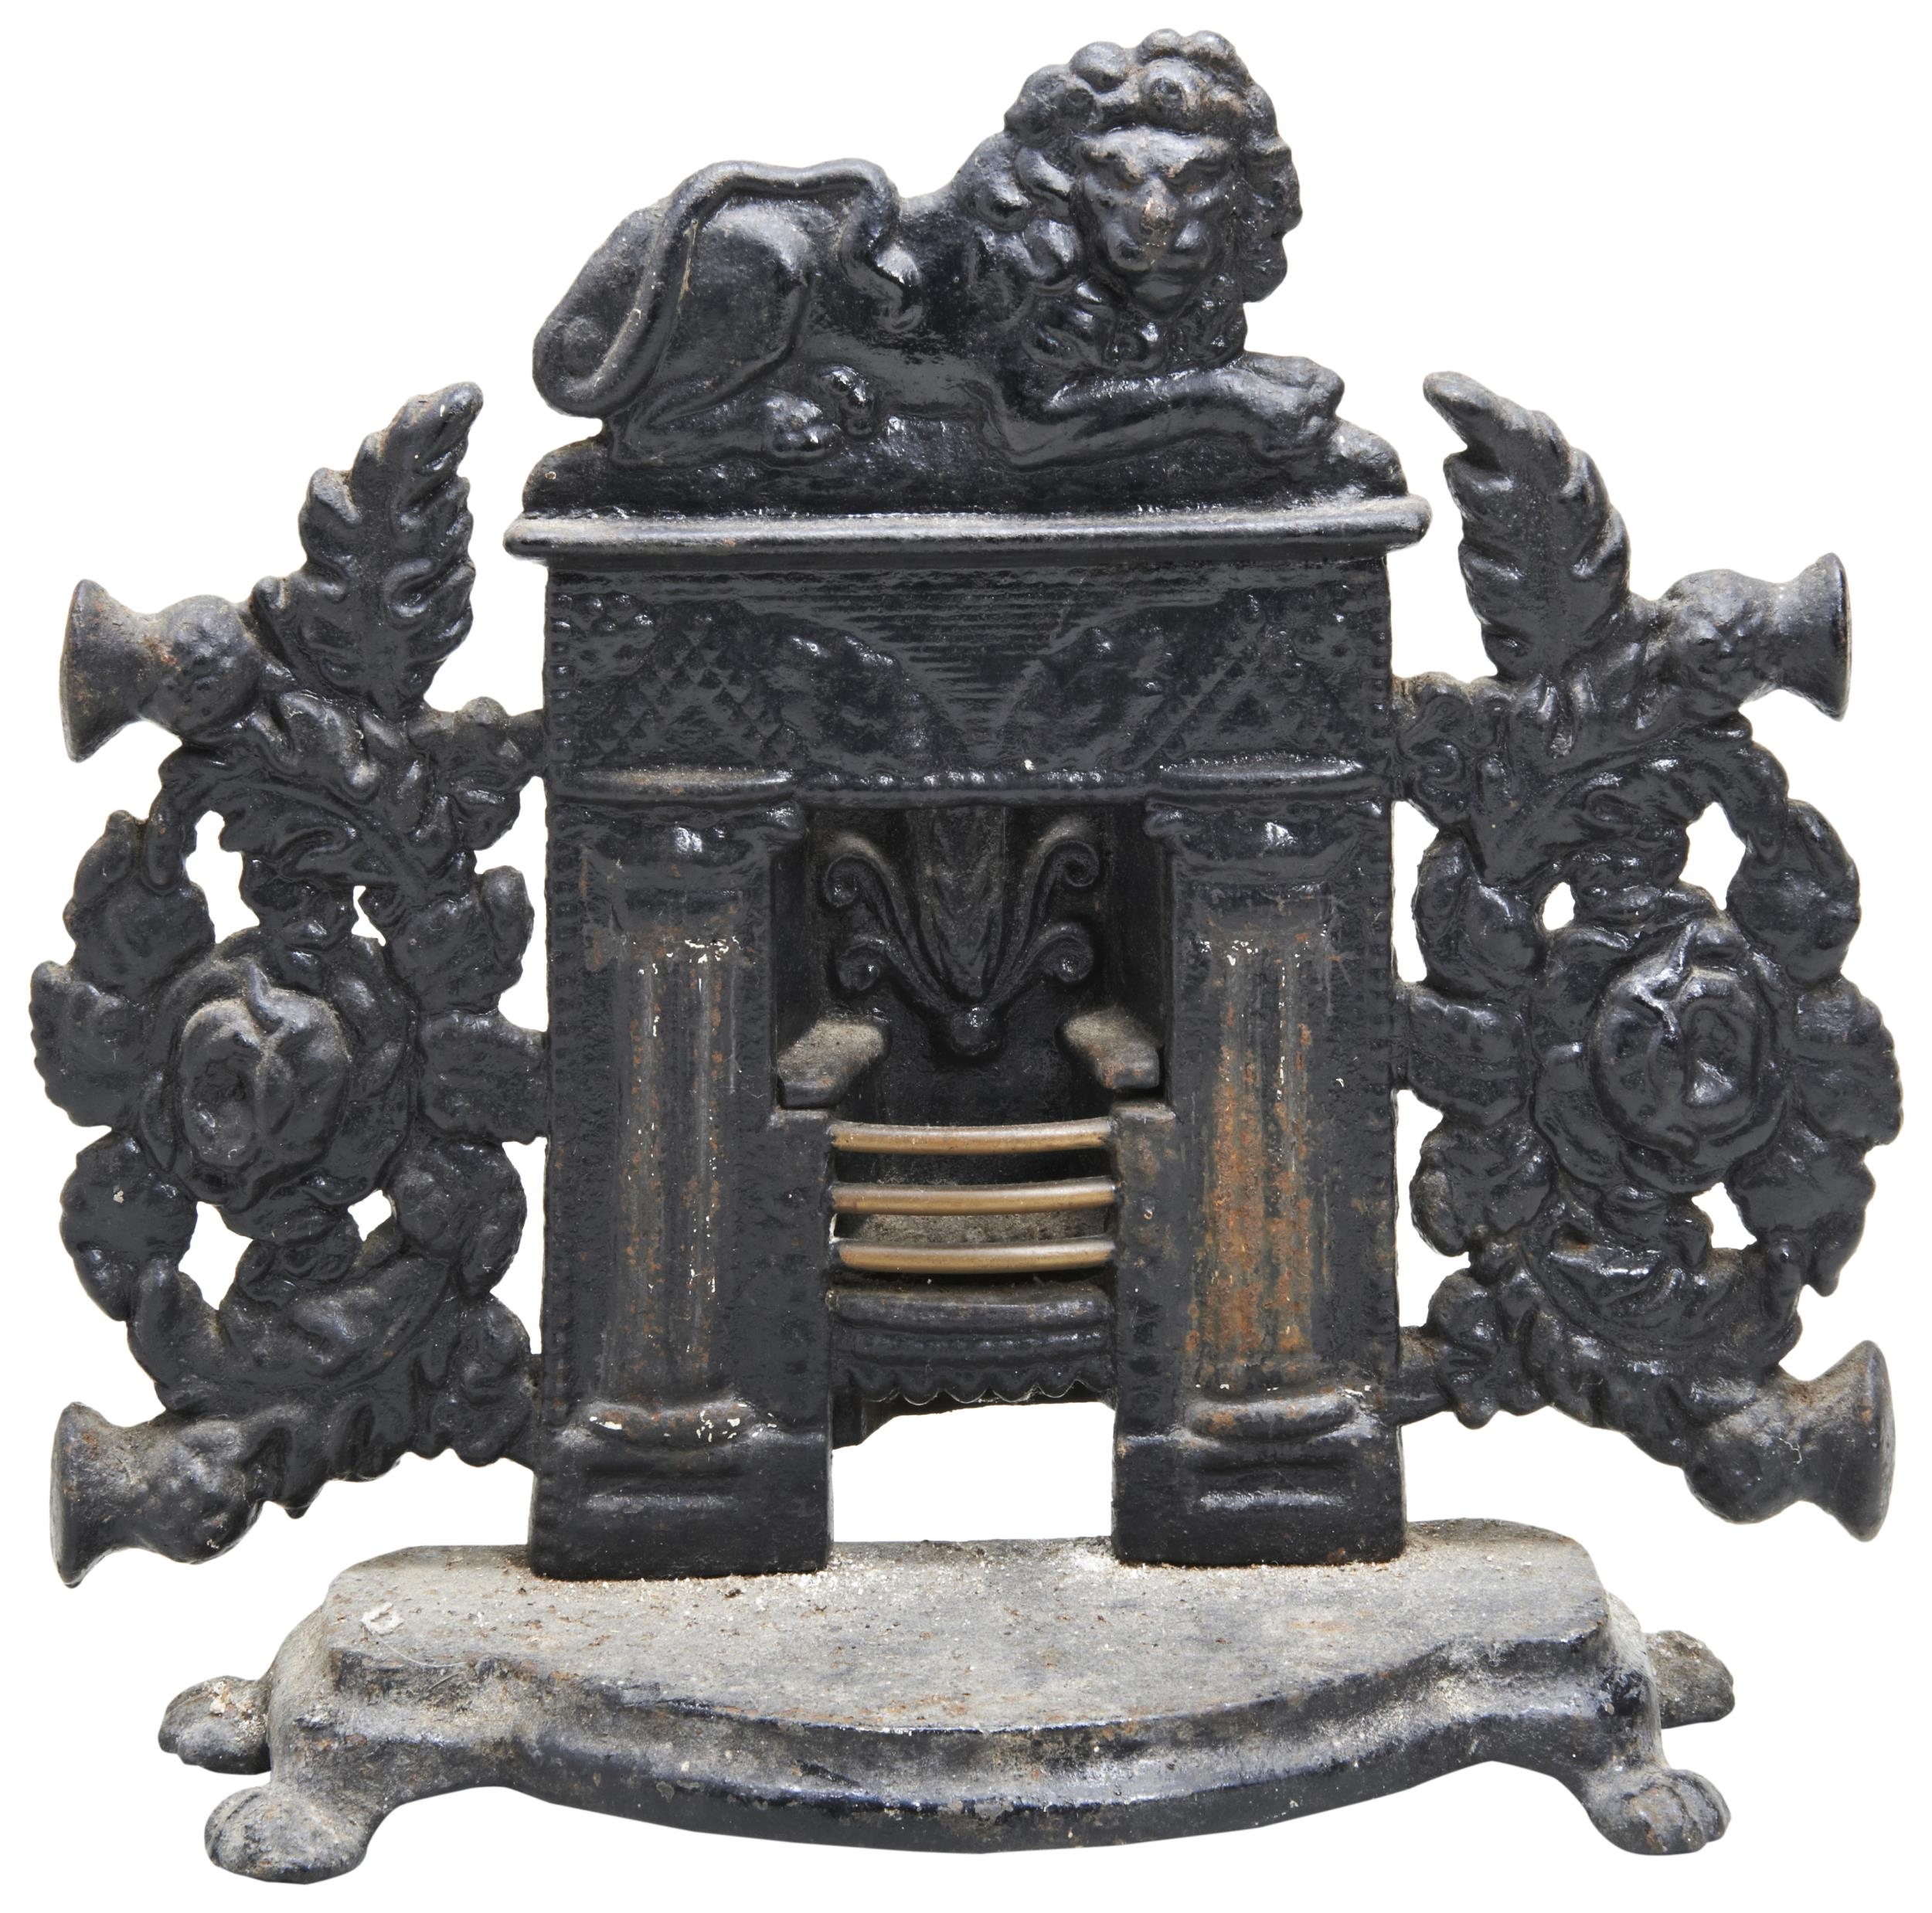 A VICTORIAN CAST IRON DOORSTOP IN THE FORM OF A FIREPLACE, THE GRATE WITH BRASS BARS. 32 x 33cms - Image 2 of 2